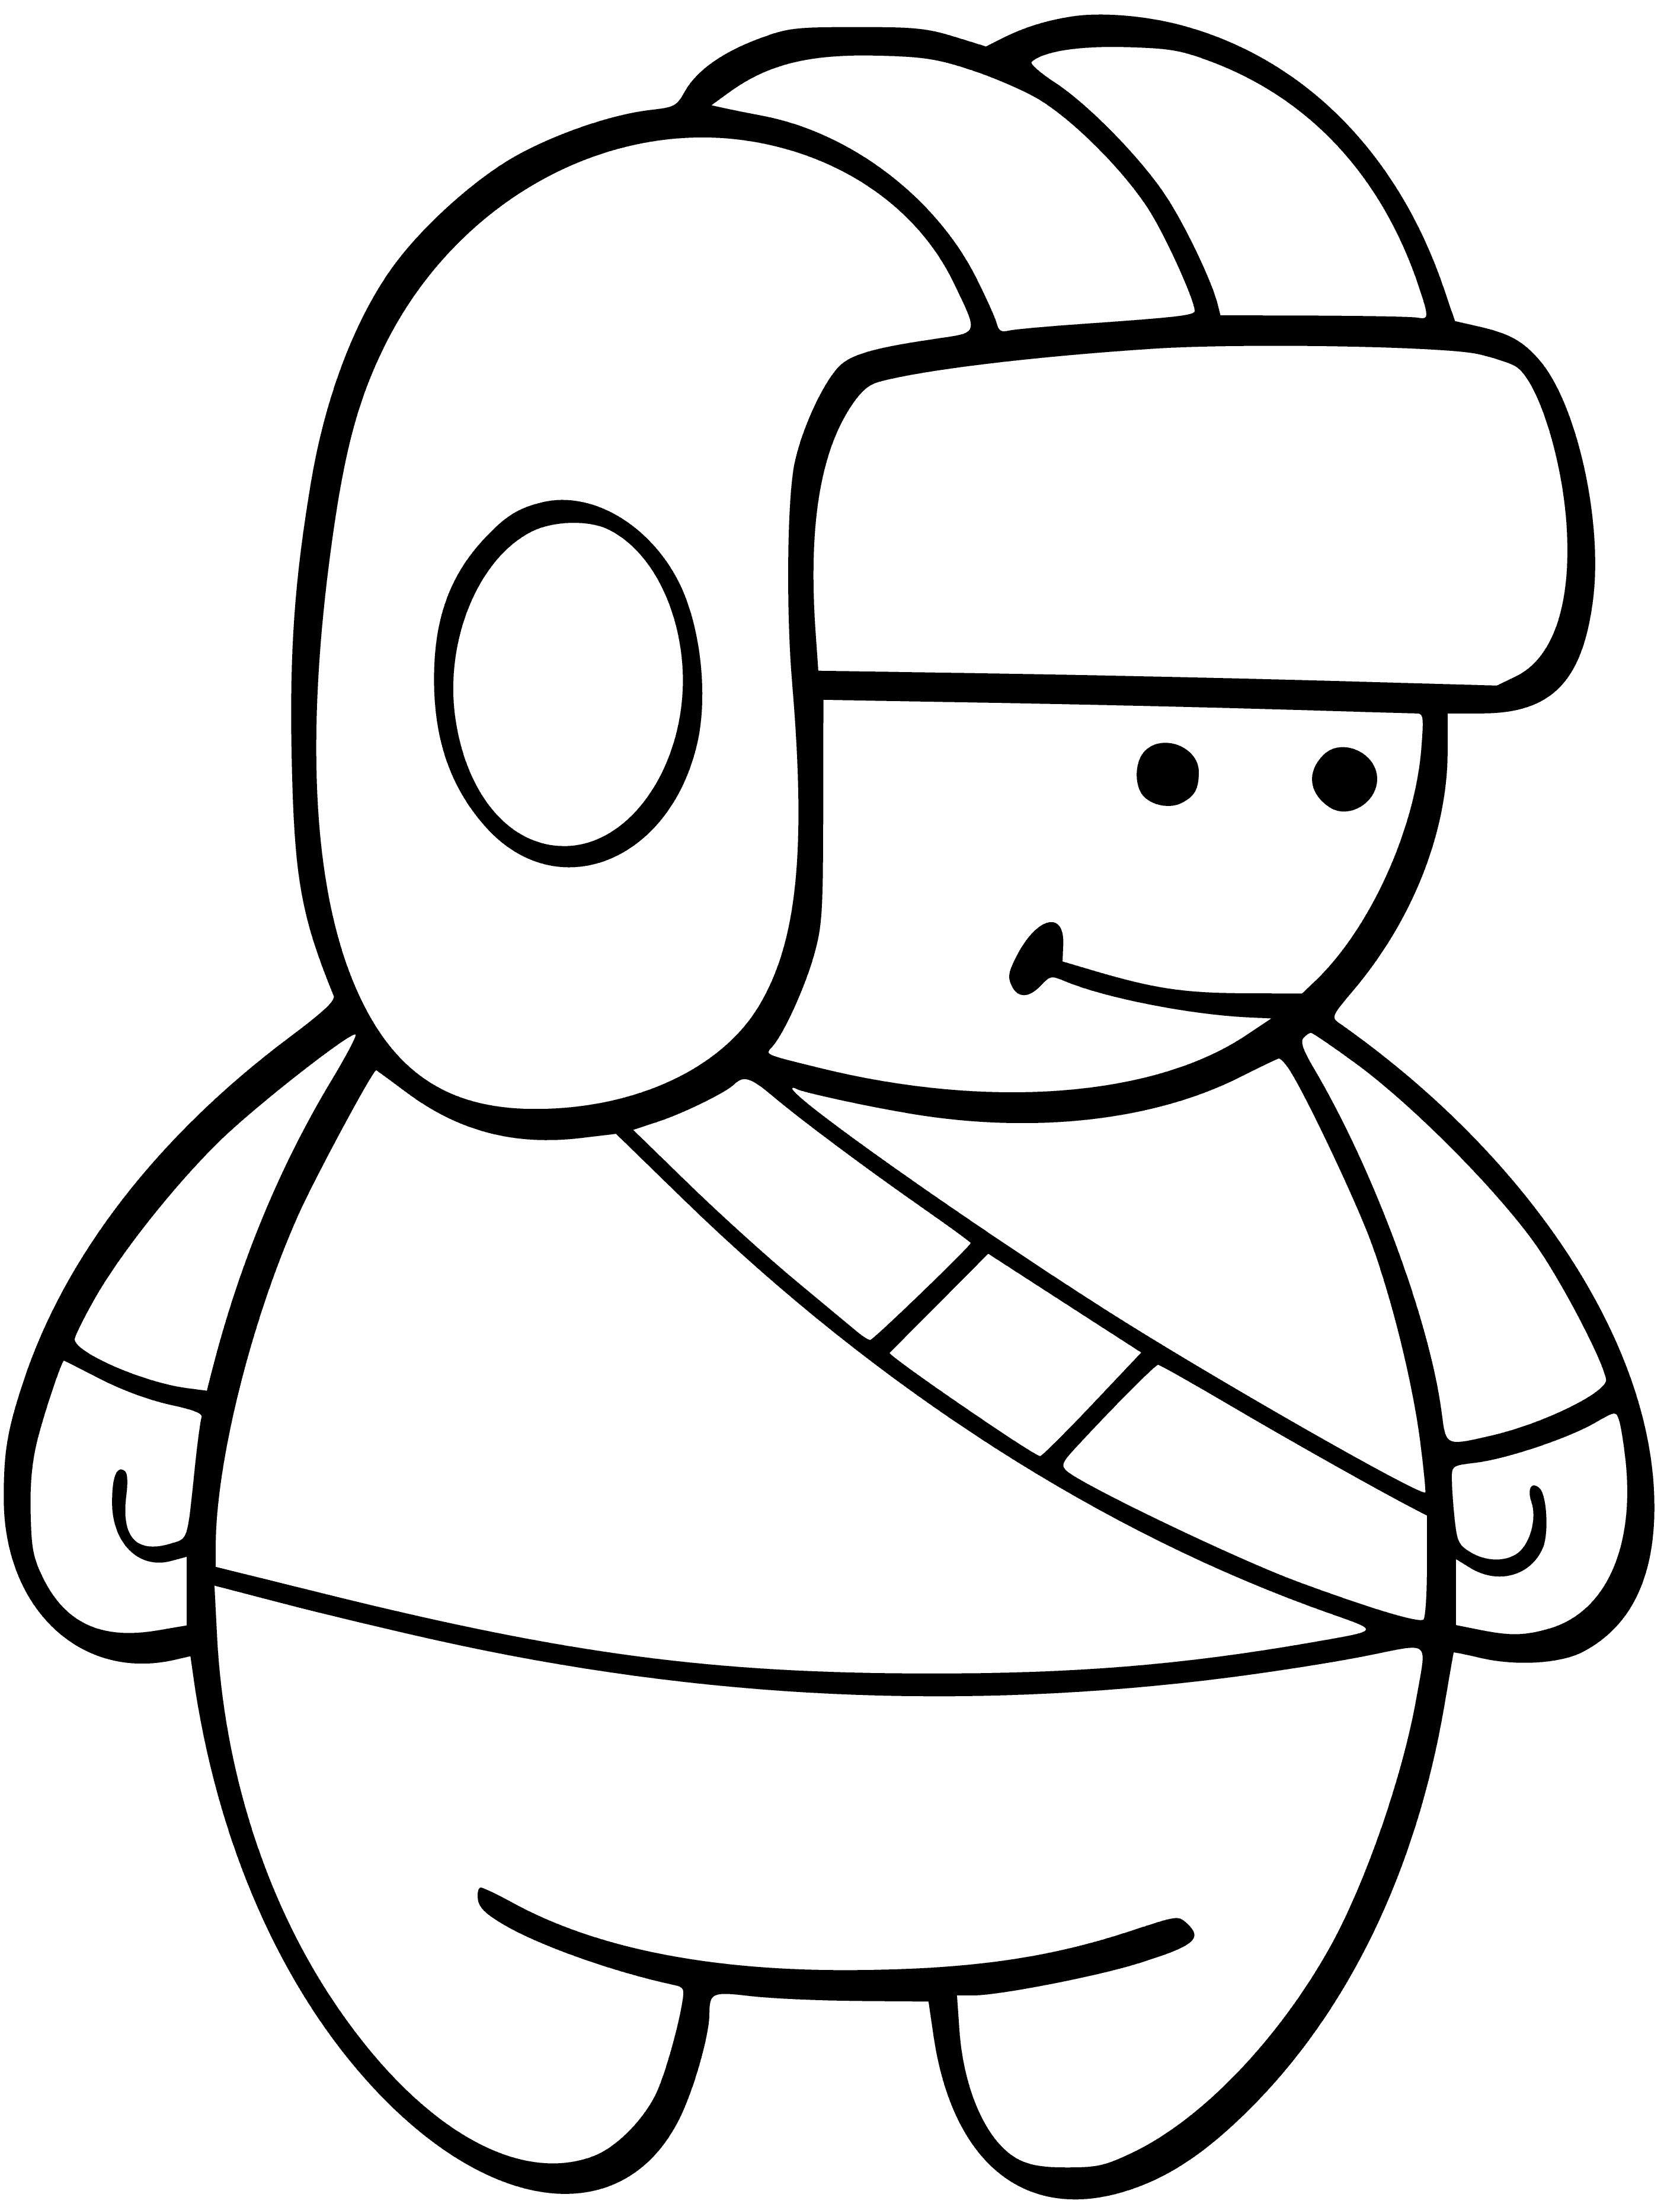 coloring page: Tankmen are responsible for the safety & operation of a tank, able to drive, maintain, repair, fire its weapons & ensure reloaded ammo.